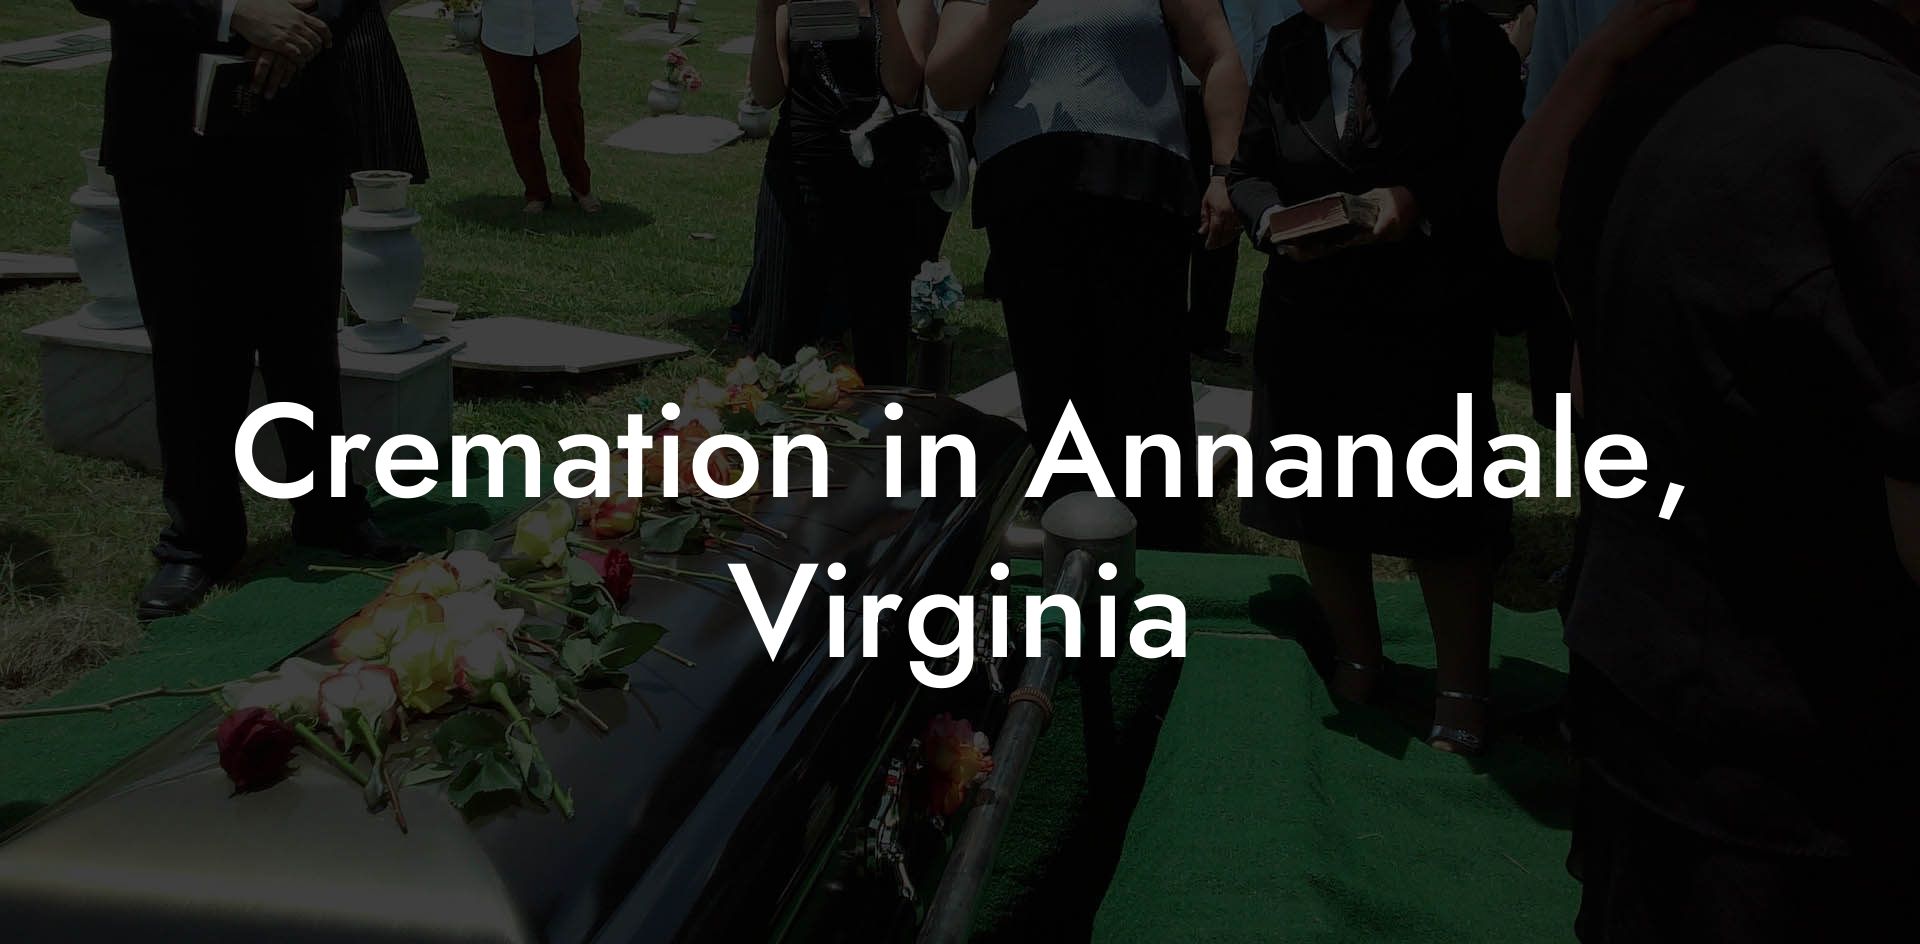 Cremation in Annandale, Virginia